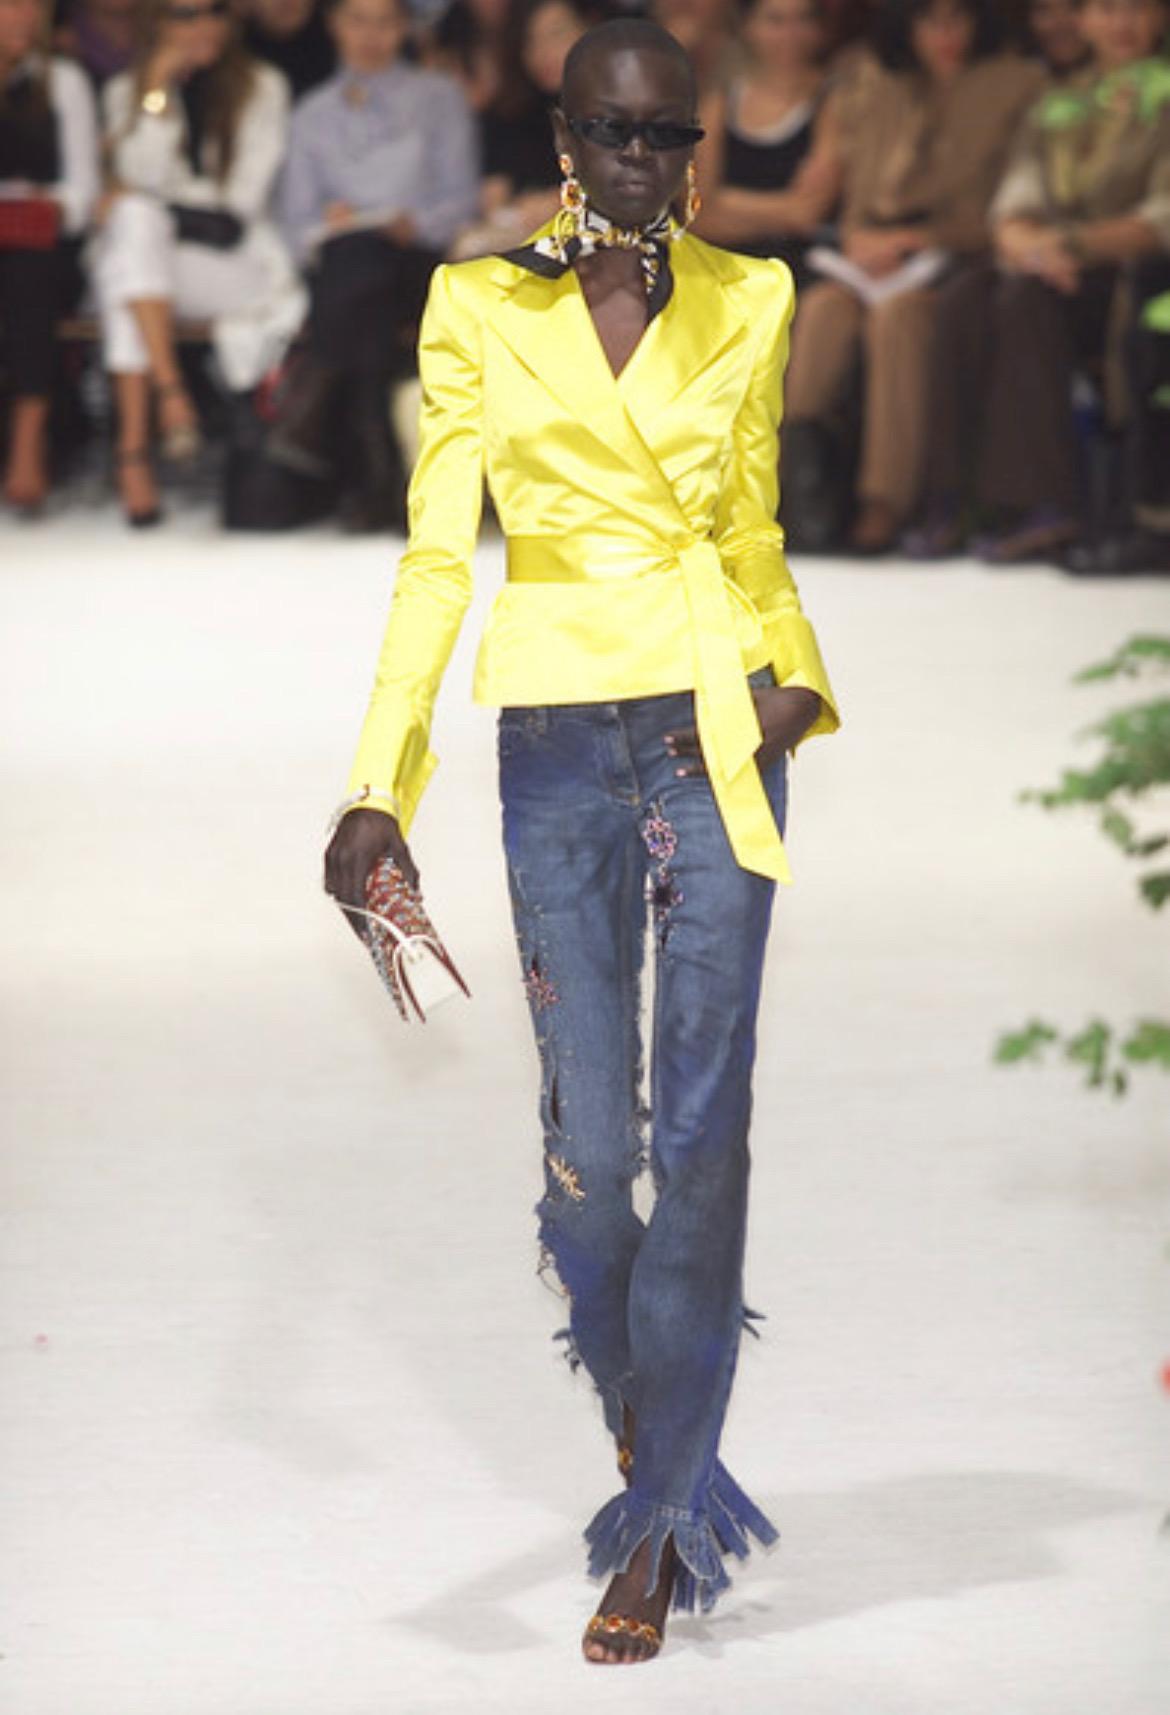 Presenting a vibrant electric blue silk satin Dolce and Gabbana blazer. From the Spring/Summer 2001 collection, the yellow version of this jacket debuted on the season's runway as part of look 9 modeled by Alek Wek and, of course, the long version